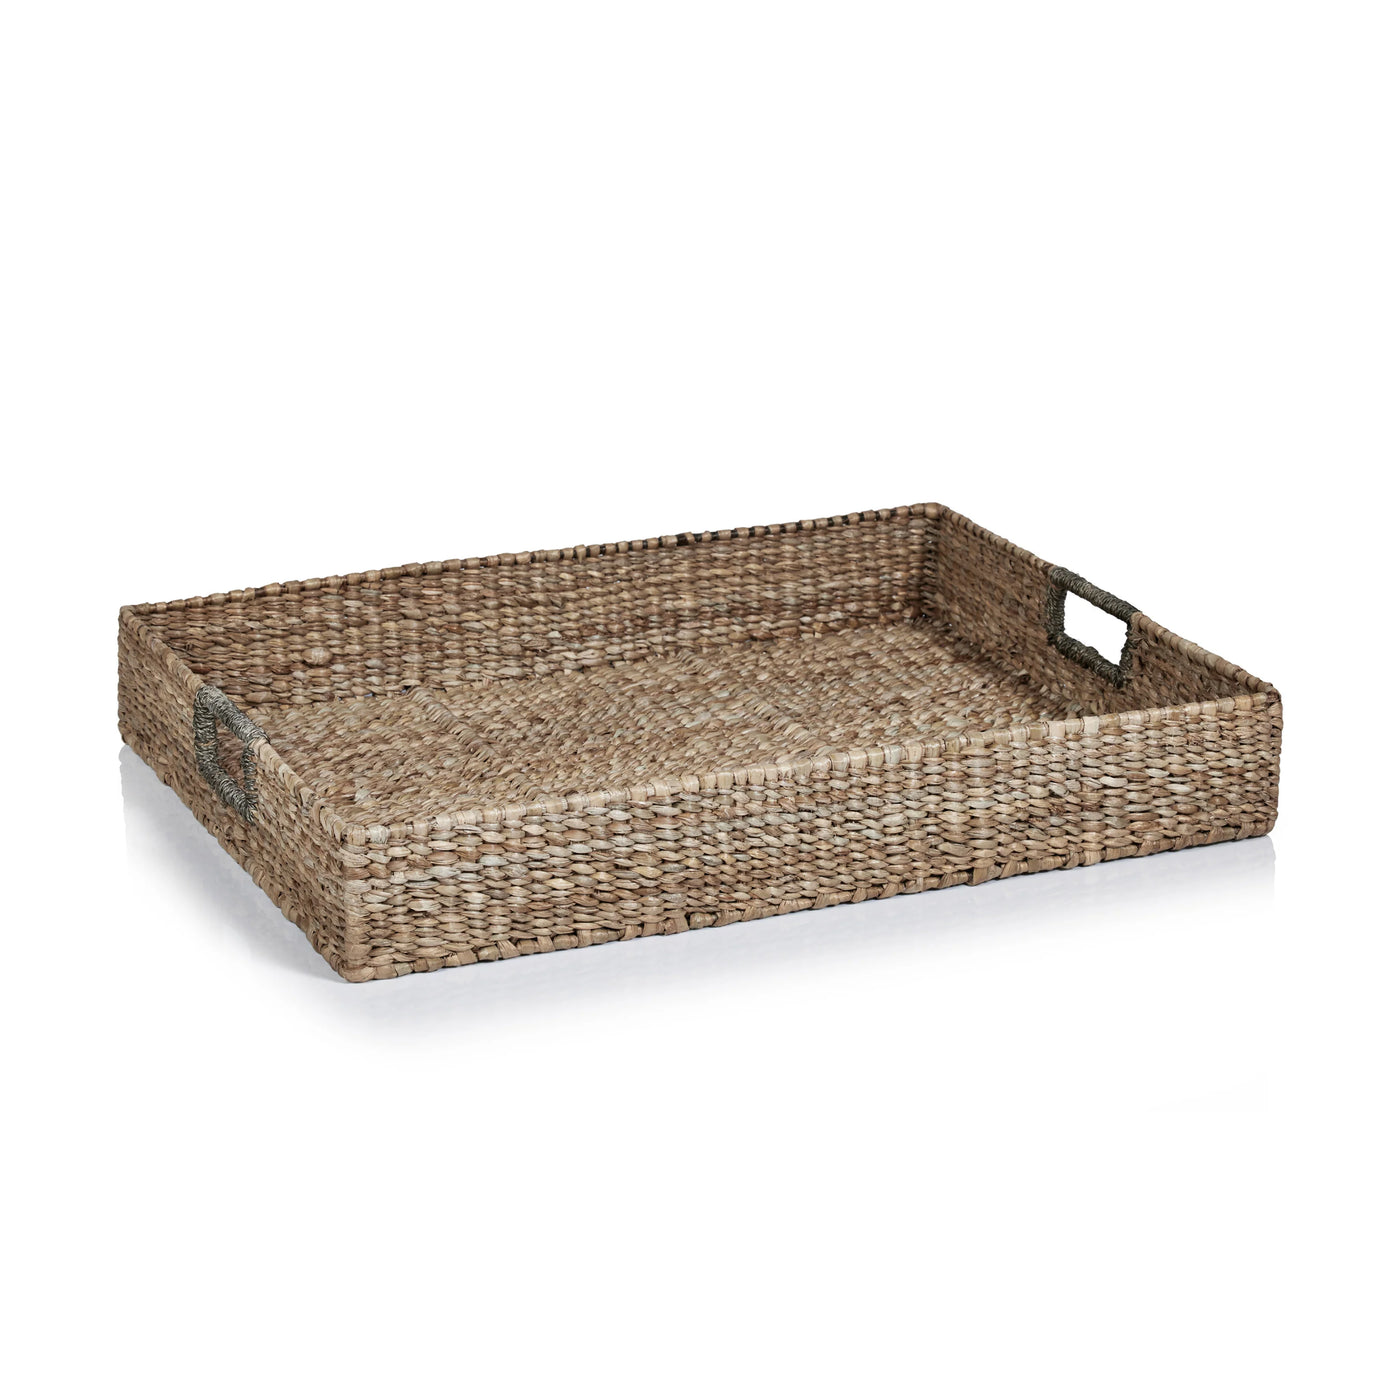 TRAY SERVING SEAGRASS (Available in 2 Sizes)